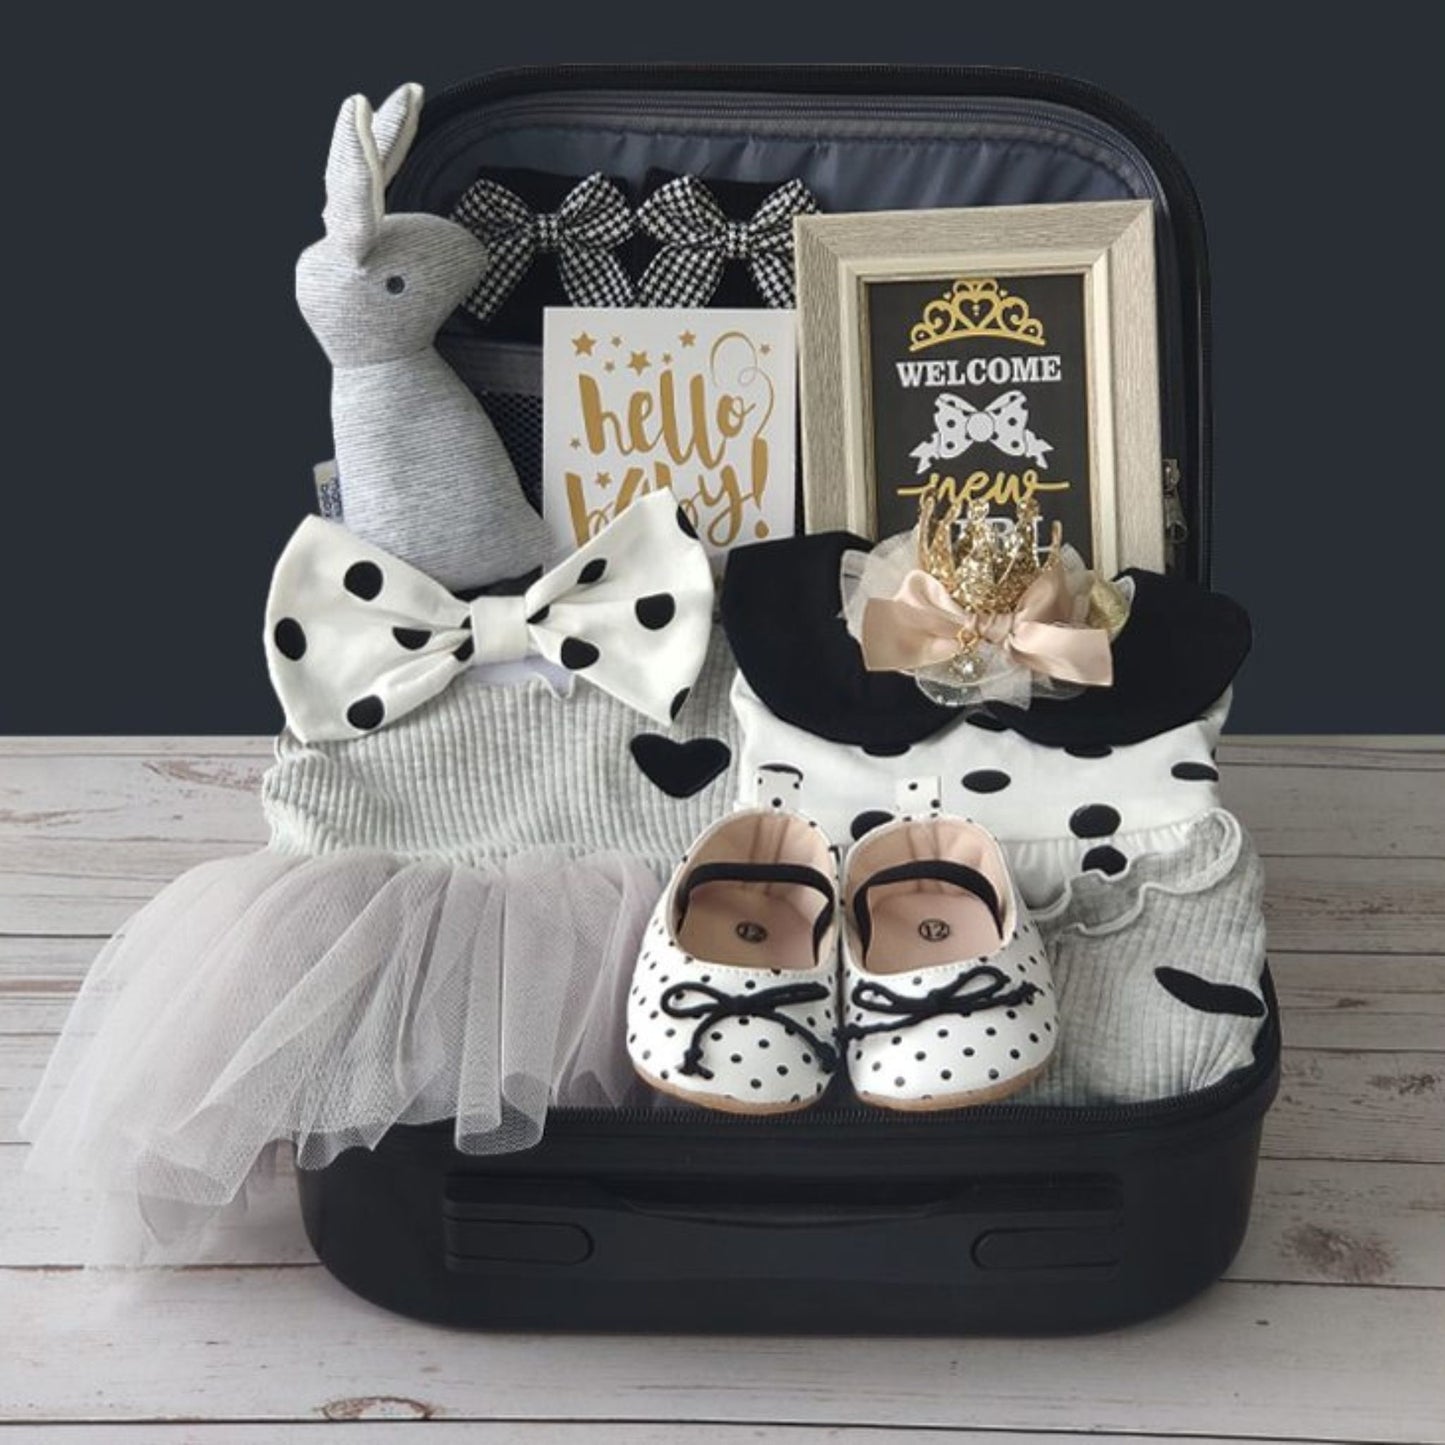 Glamour Girl Baby Gift Luggage Set 0-3 Months